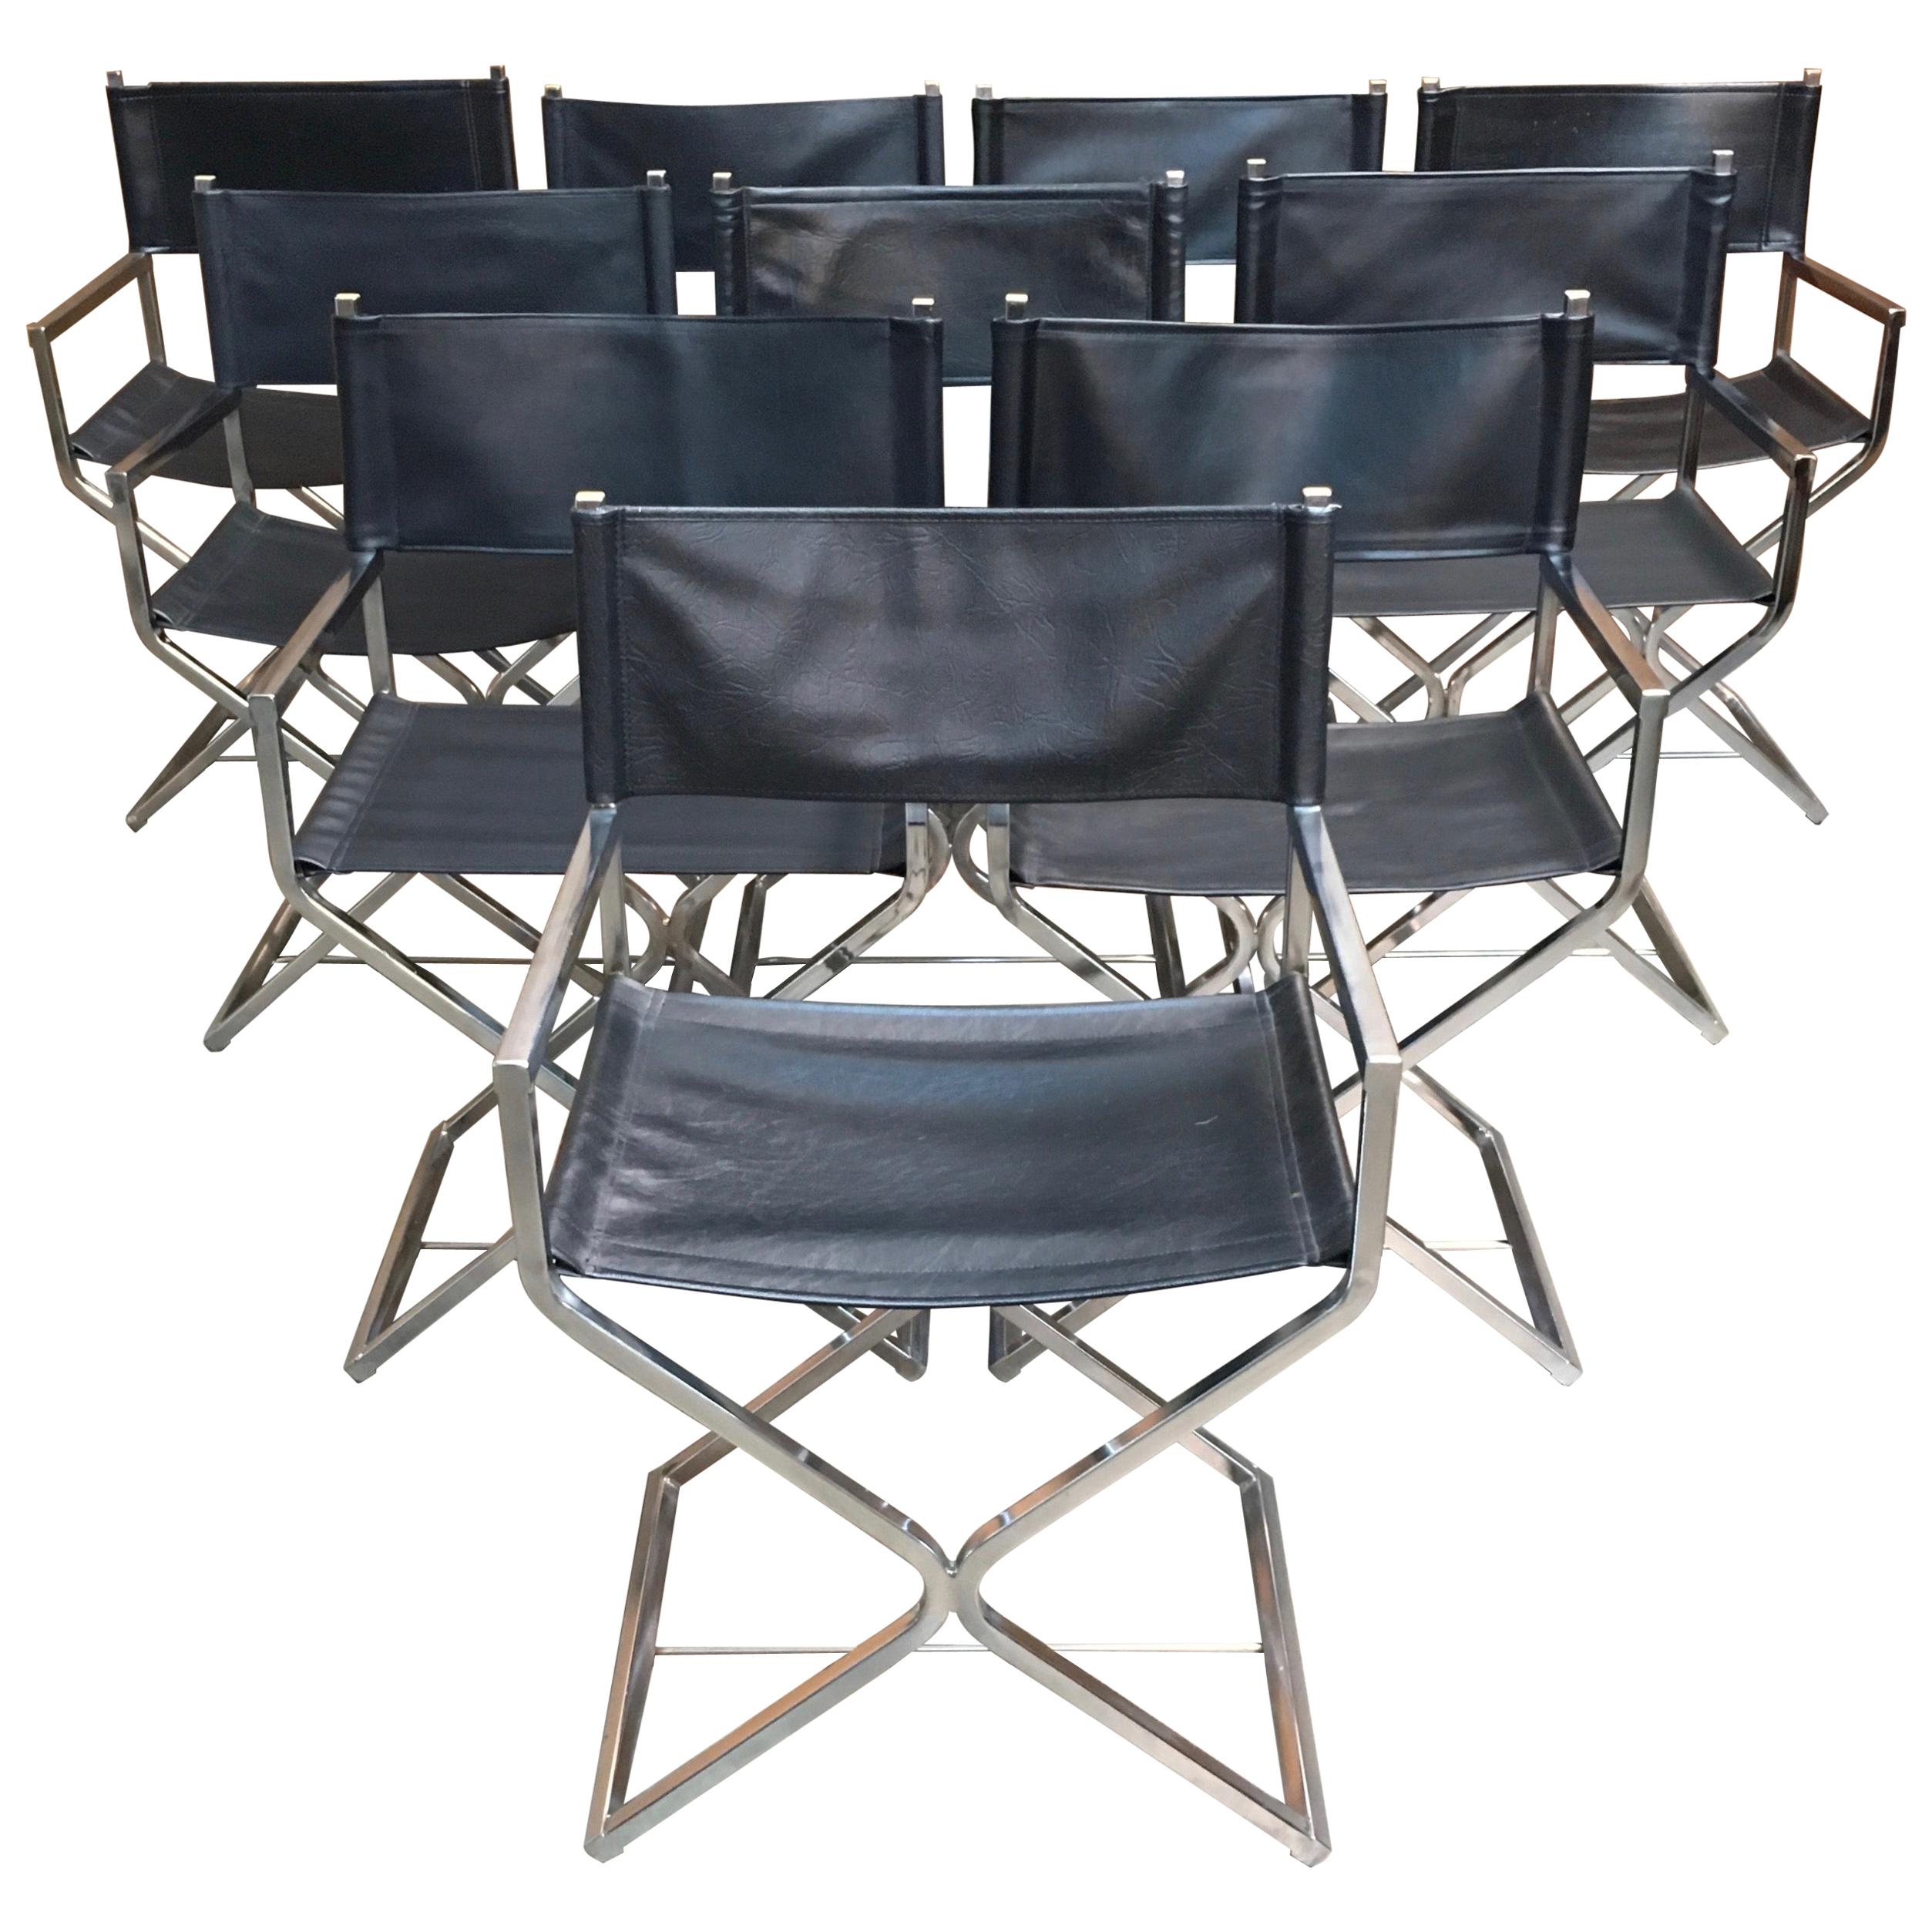 Set of Ten Chrome Director Style Chairs, 1970s